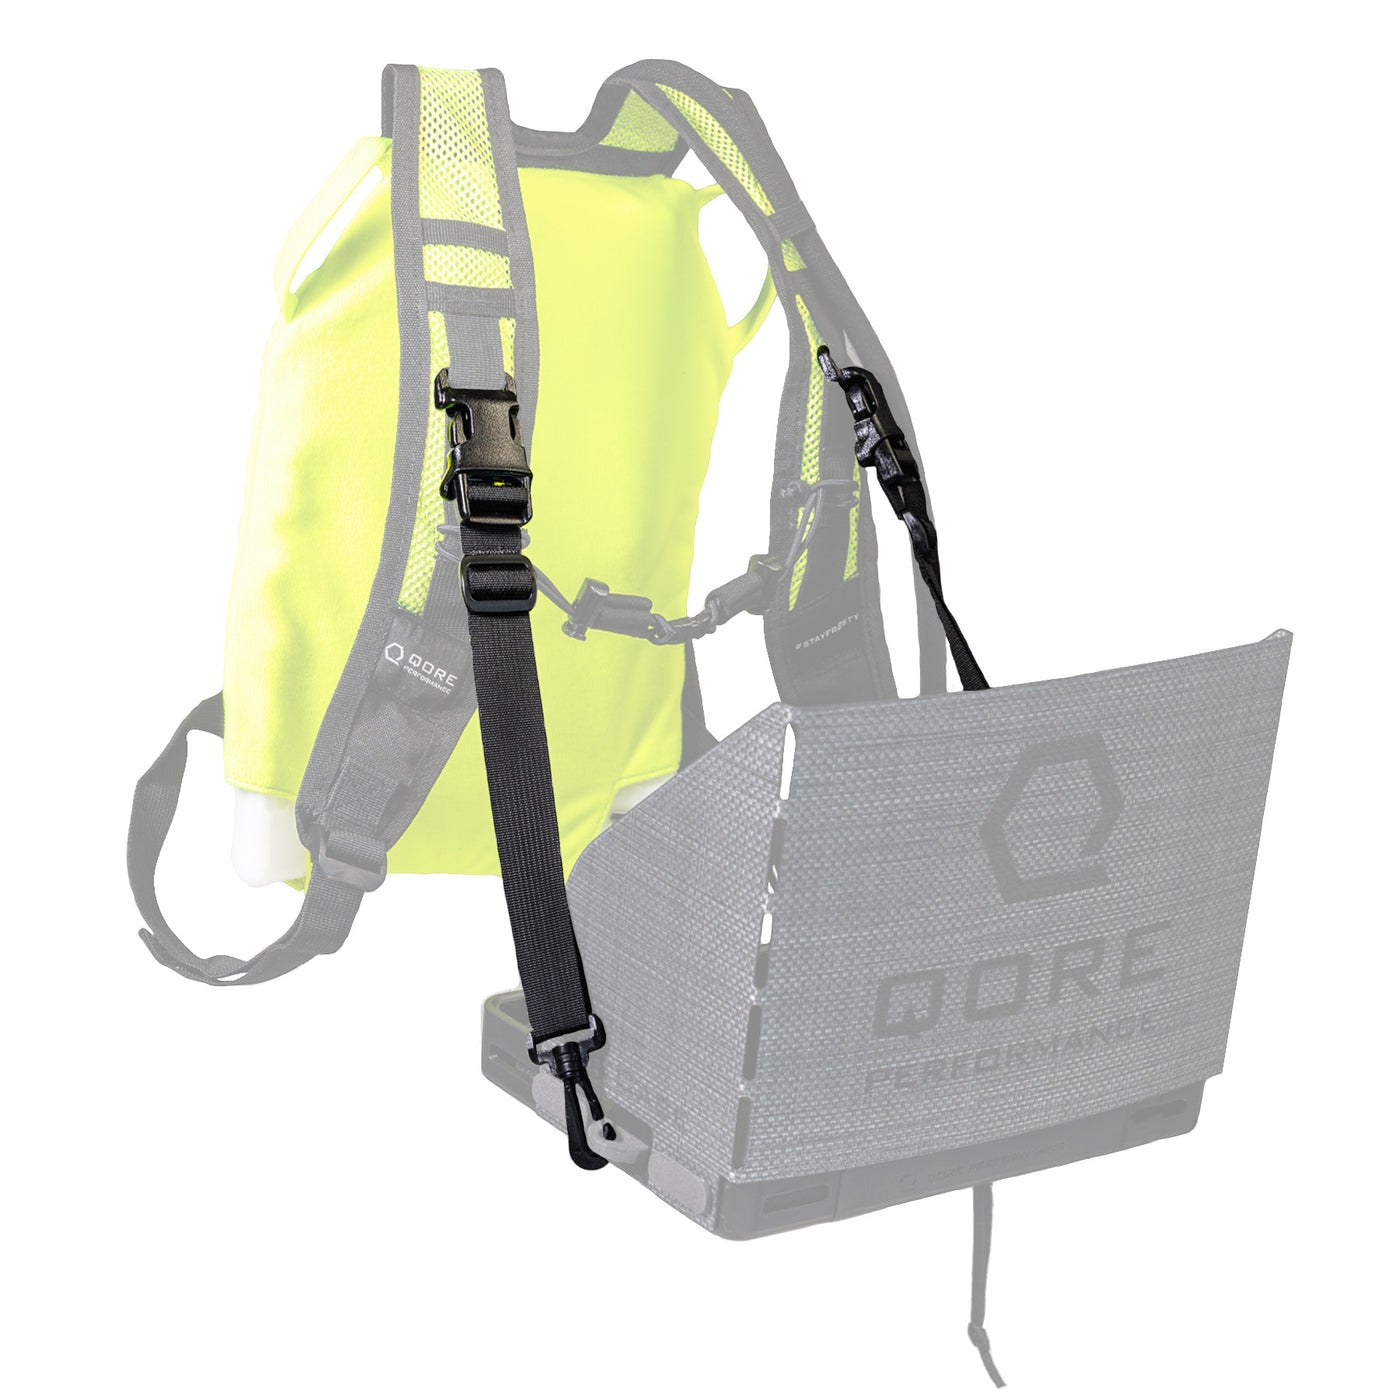 ICECASE Strap Kit (for ICEVEST Black, ICEVEST Class 2, and ICEPLATE Hydration Backpack)